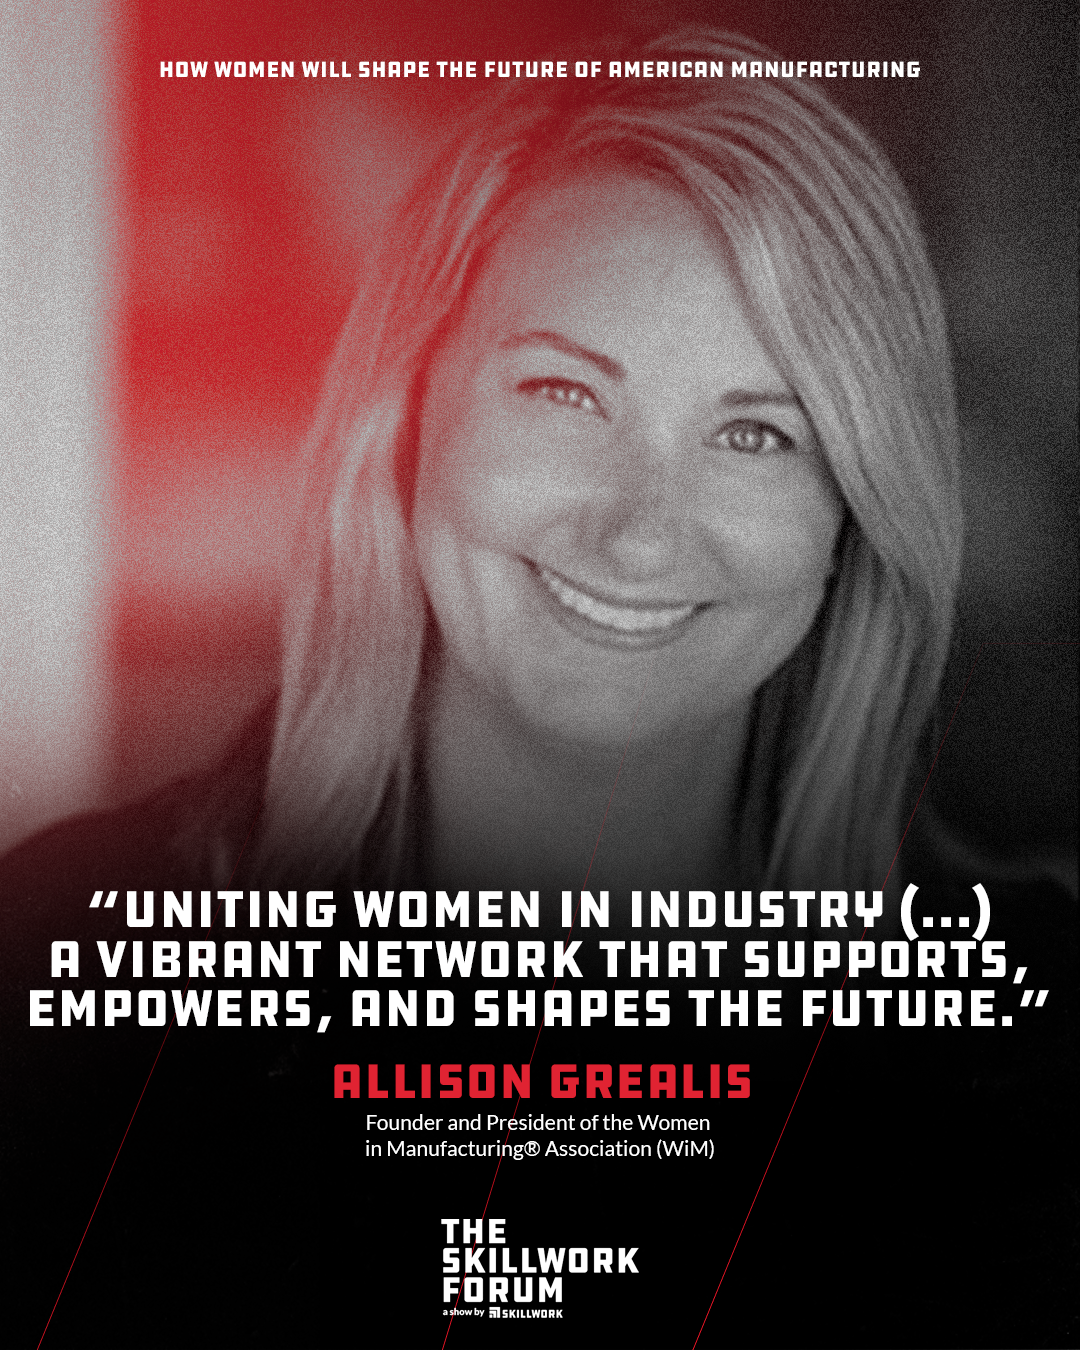 210505_Skillwork_TSWF_Ep_How women will shape the future of American manufacturing - with Allison Grealis_QG1